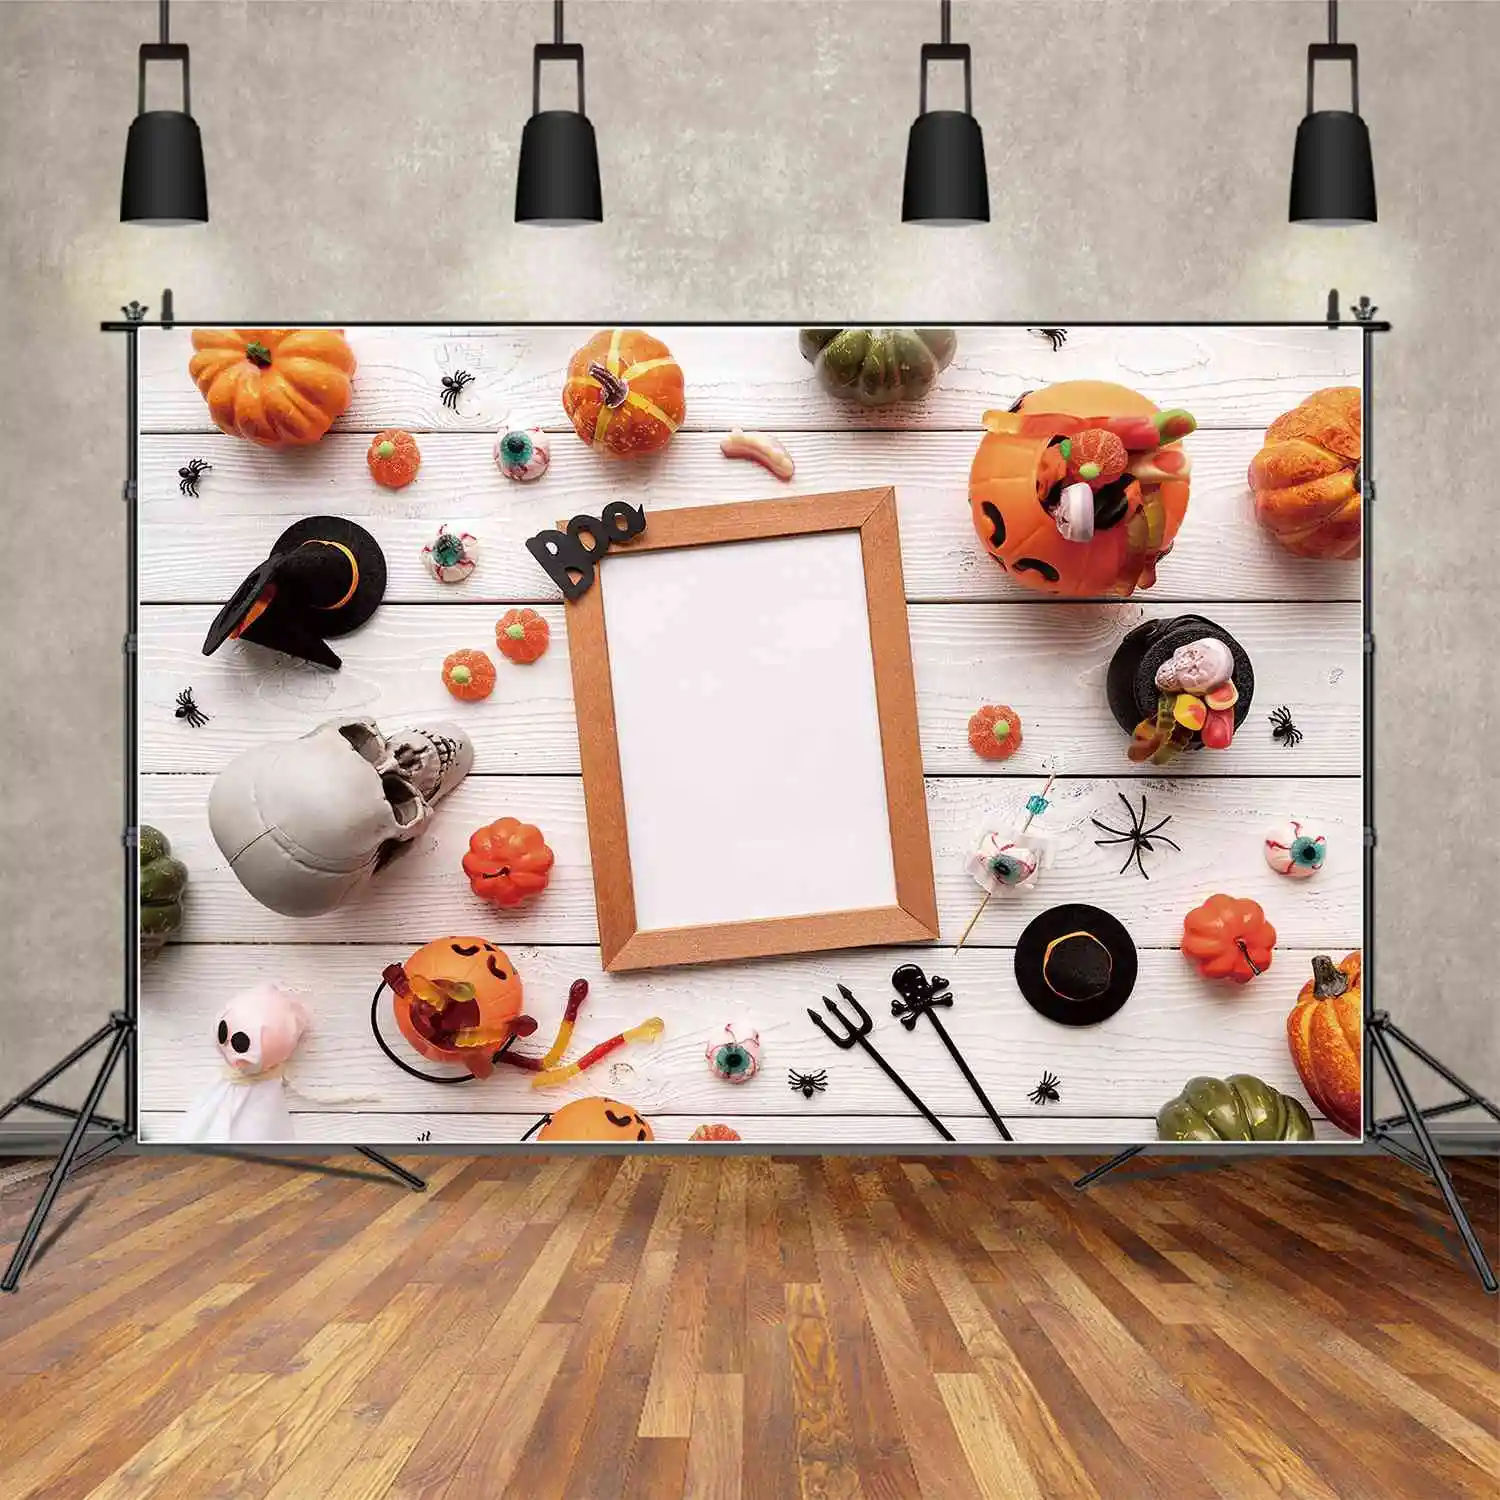 

MOON.QG Backdrop Custom Halloween Party Wood Paper Wall Party Photo Booth Background Children Pumpkin Skull Spider Eye Hat Props